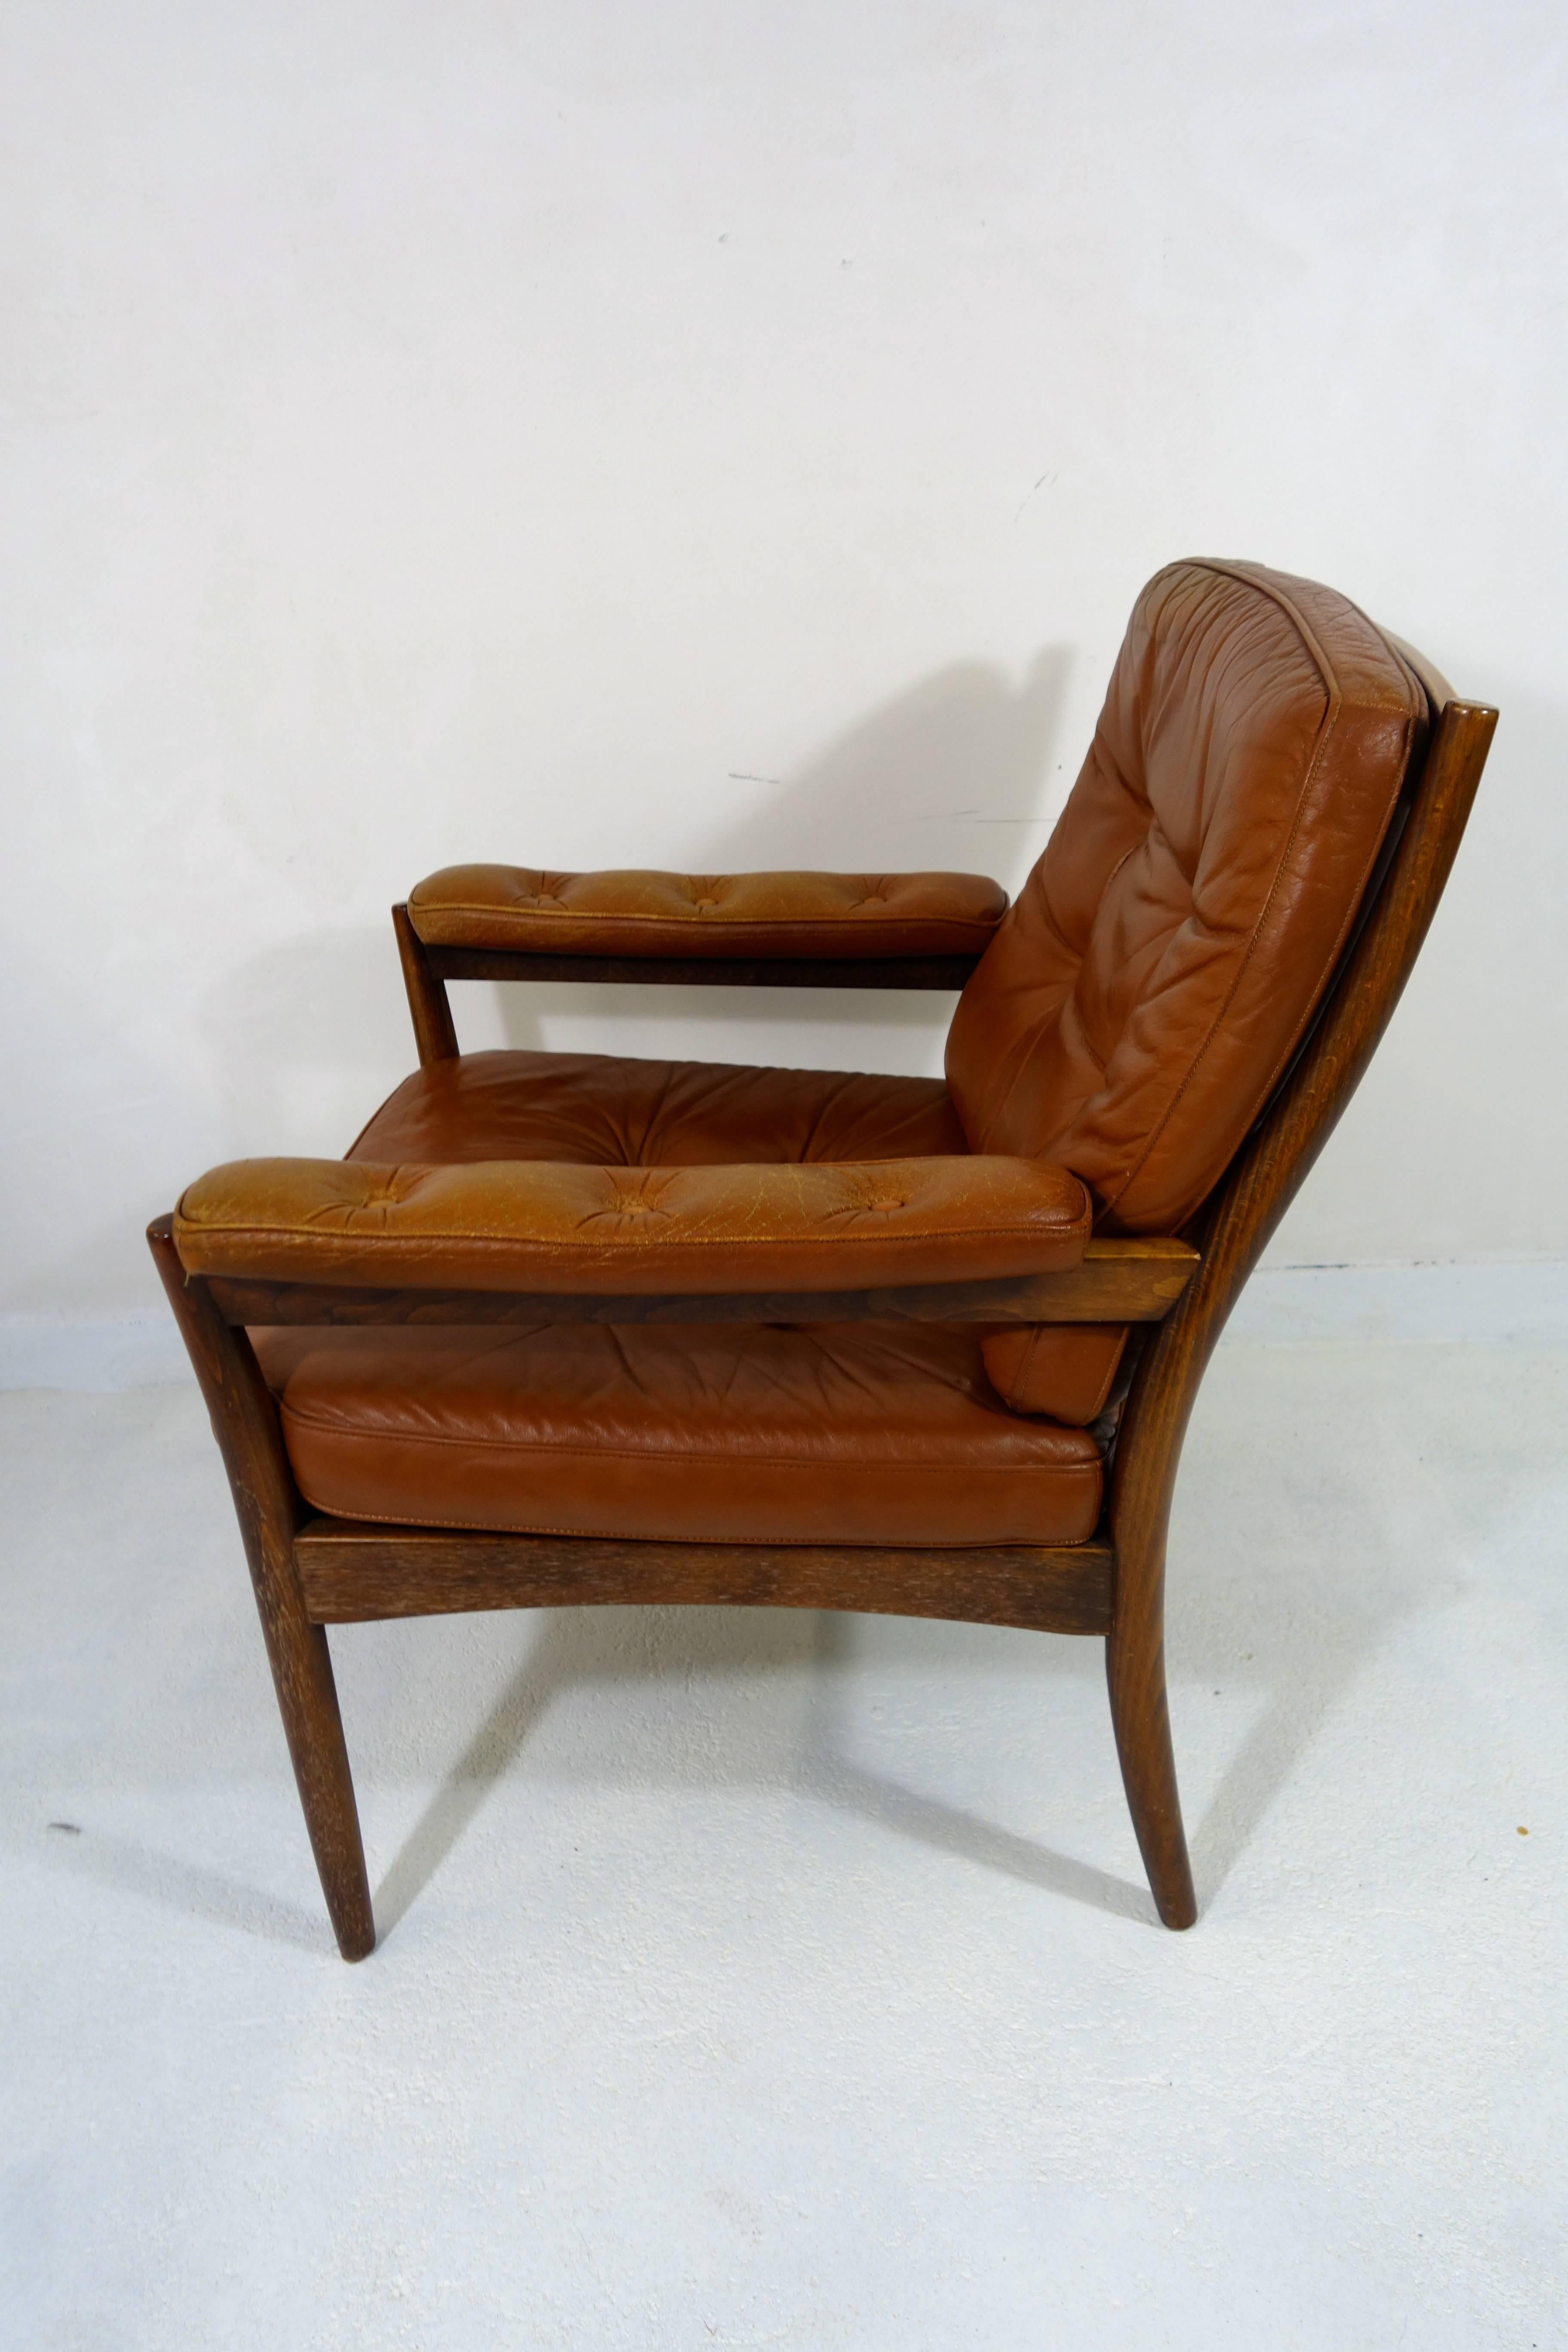 Pair of wooden armchairs designed in 1965 and produced by Göte Möbel Nassjö of Sweden. 
They have cushions made of cognac buttoned leather: seating cushion, back cushion and arm cushions, all with a wonderful patina.
Makers label marked on the frame.